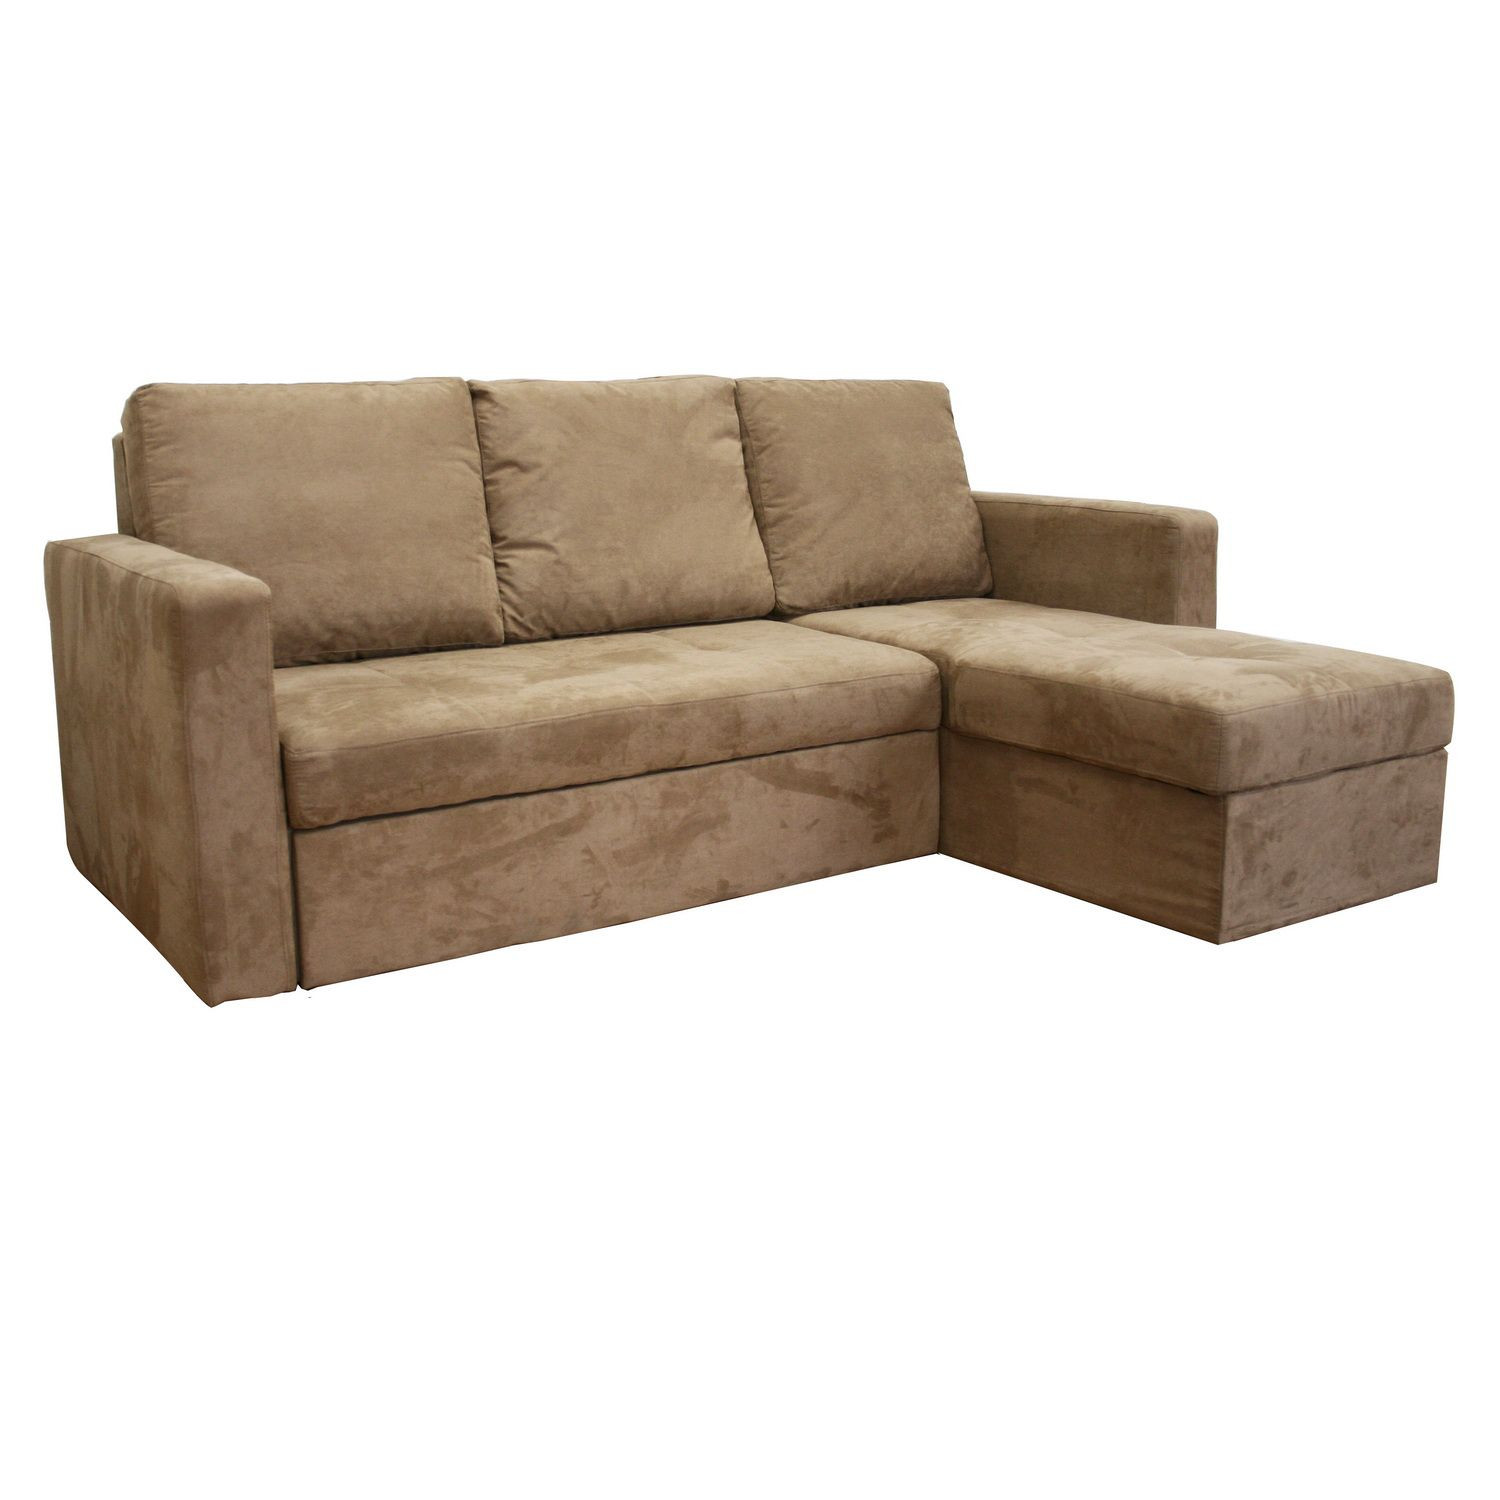 Best ideas about Tan Sectional Sofa
. Save or Pin Baxton Studio Linden Tan Microfiber Convertible Sectional Now.